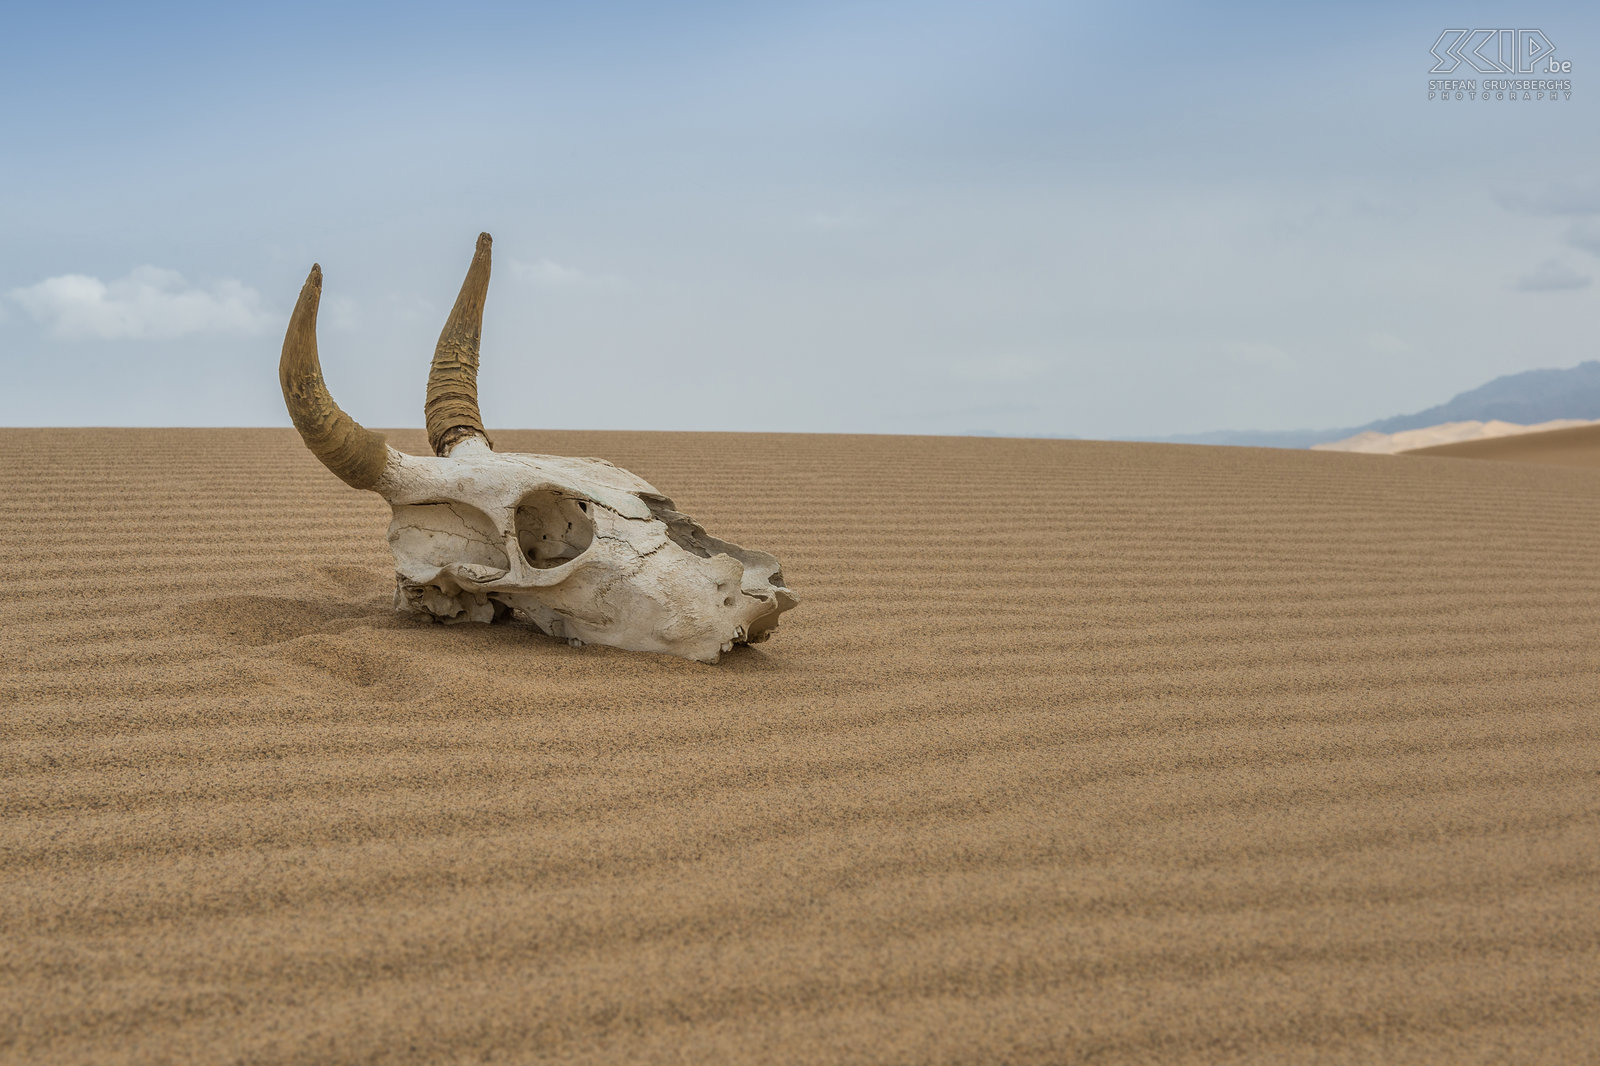 Gobi - Khongoryn Els - Animal skull Khongoryn Els also known as the ‘Singing dunes’ are the best known sand dunes of the Gobi desert where only few plants and animals can survive. Temperatures can reach +40° C. in summer and -40° C in winter. Stefan Cruysberghs